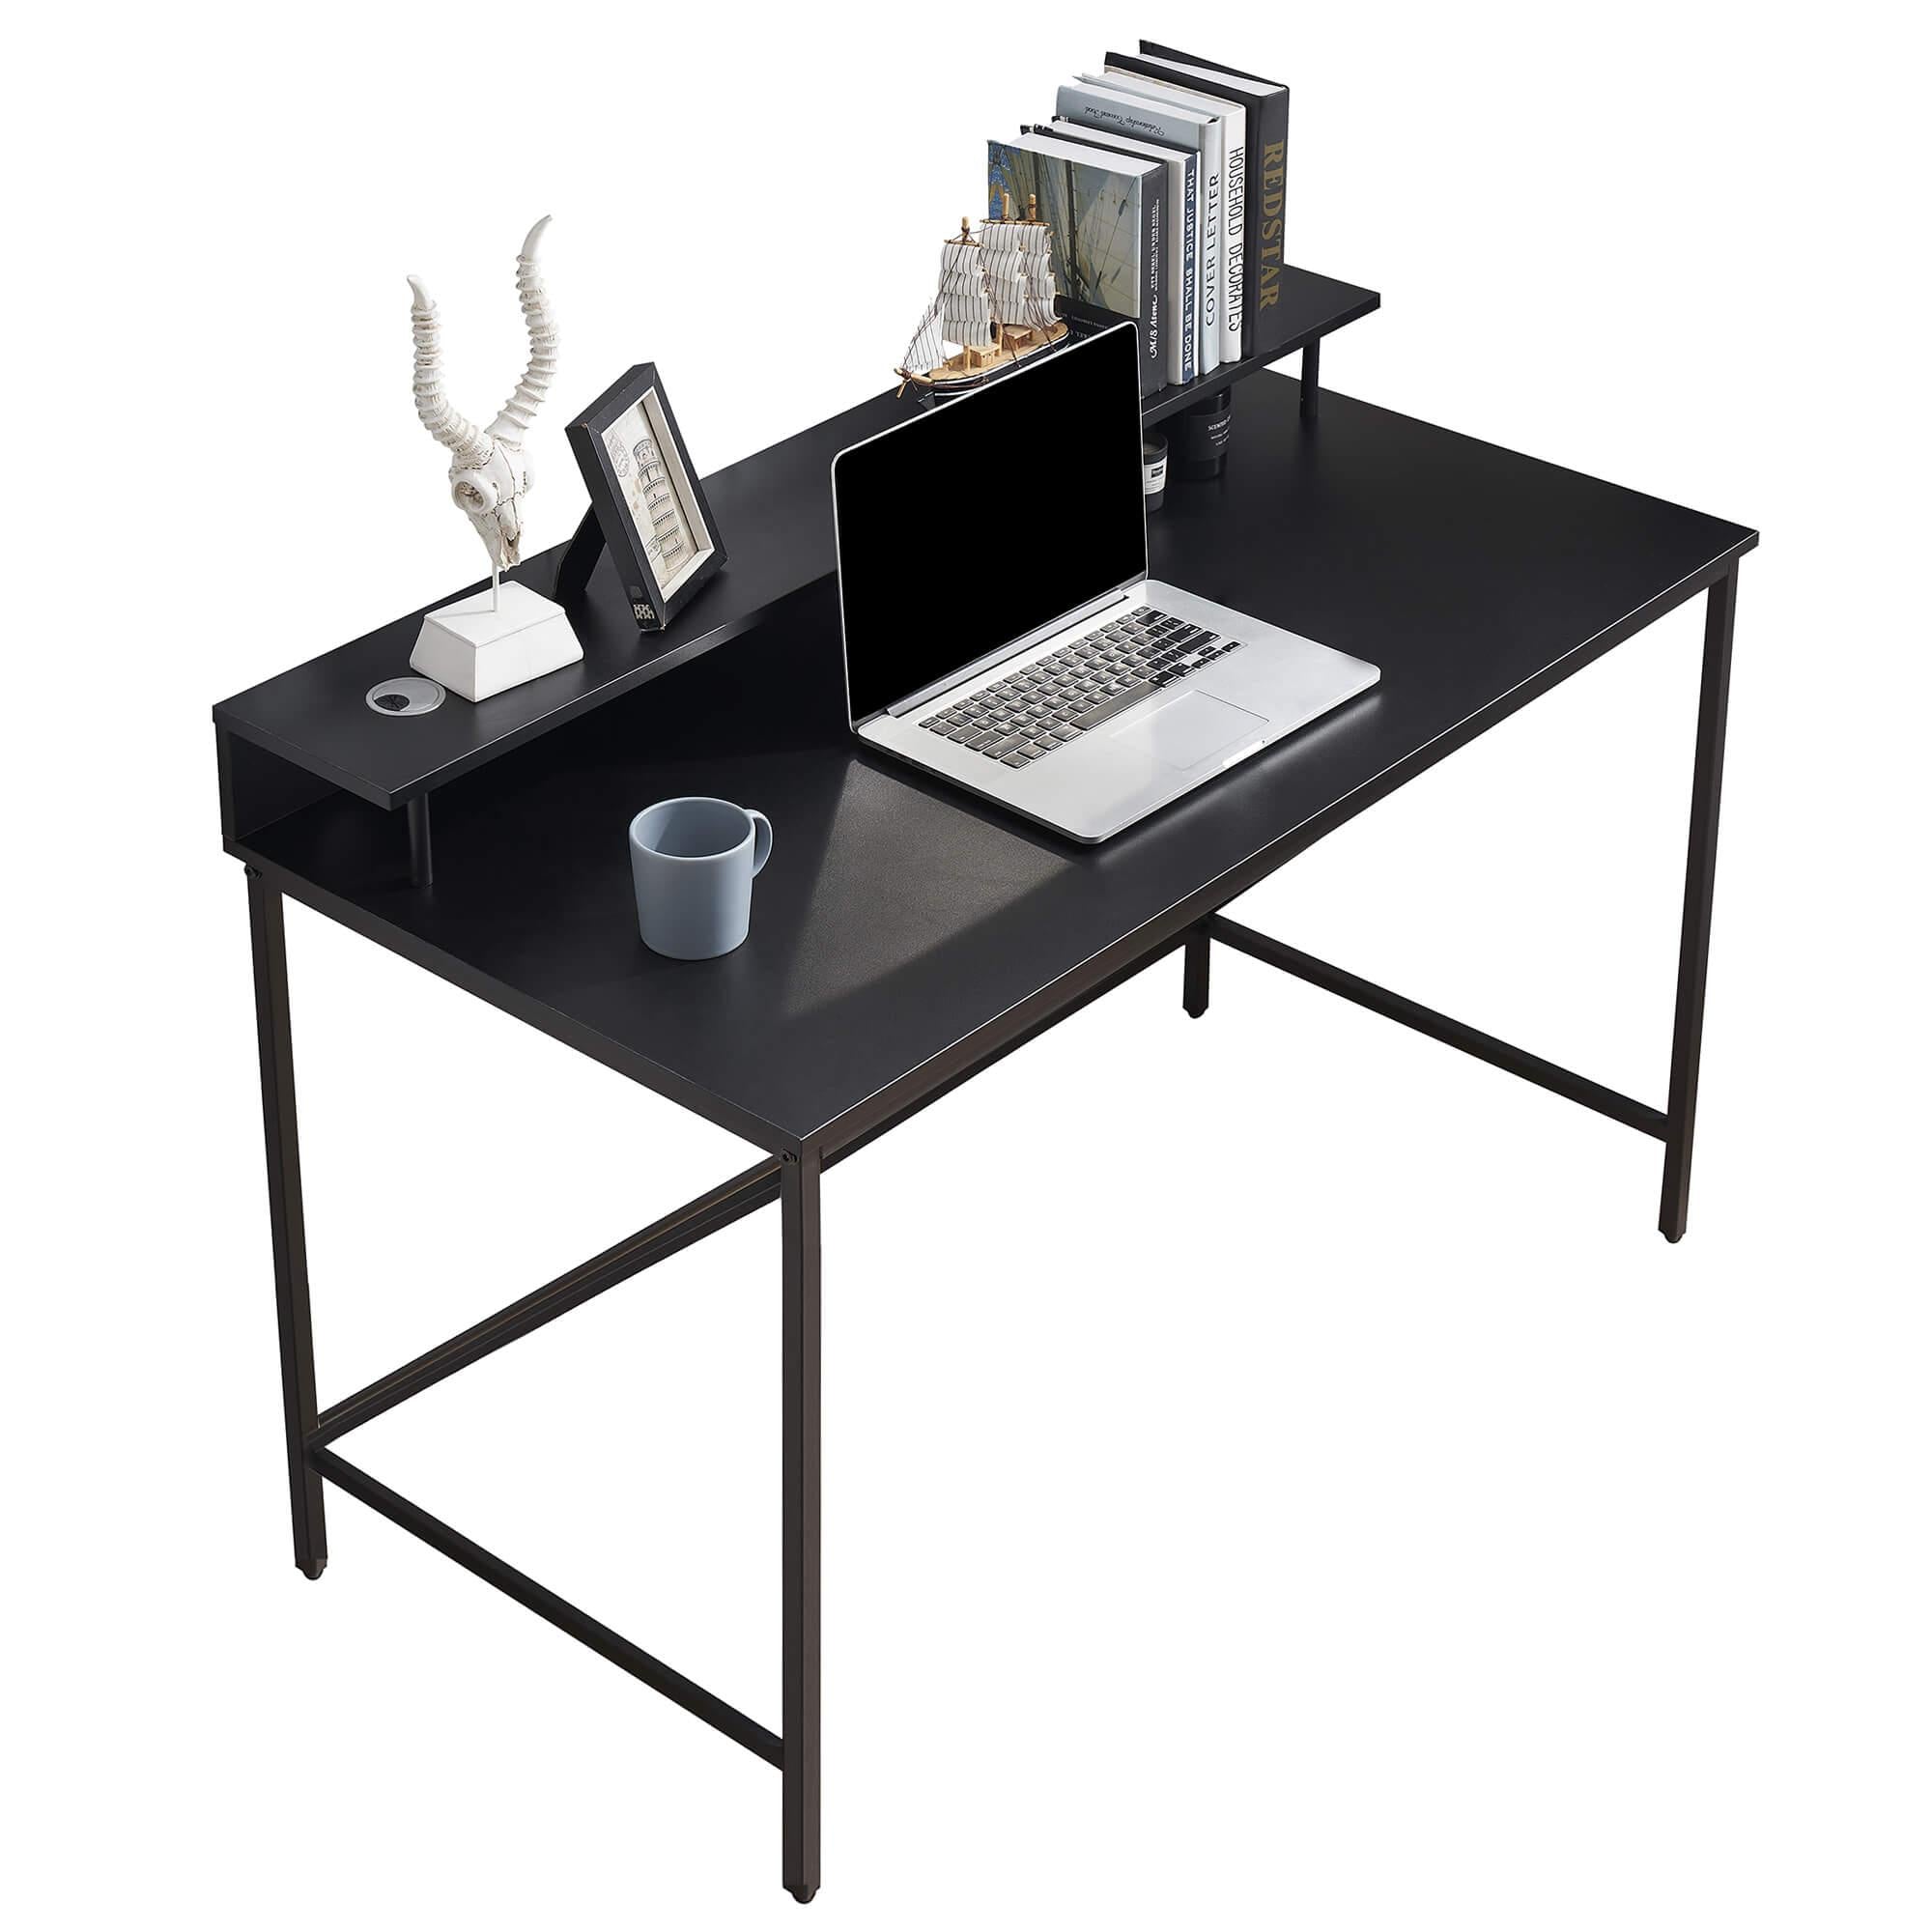 Ivinta Computer Desk 47 inch with Monitor Stand - Ivinta